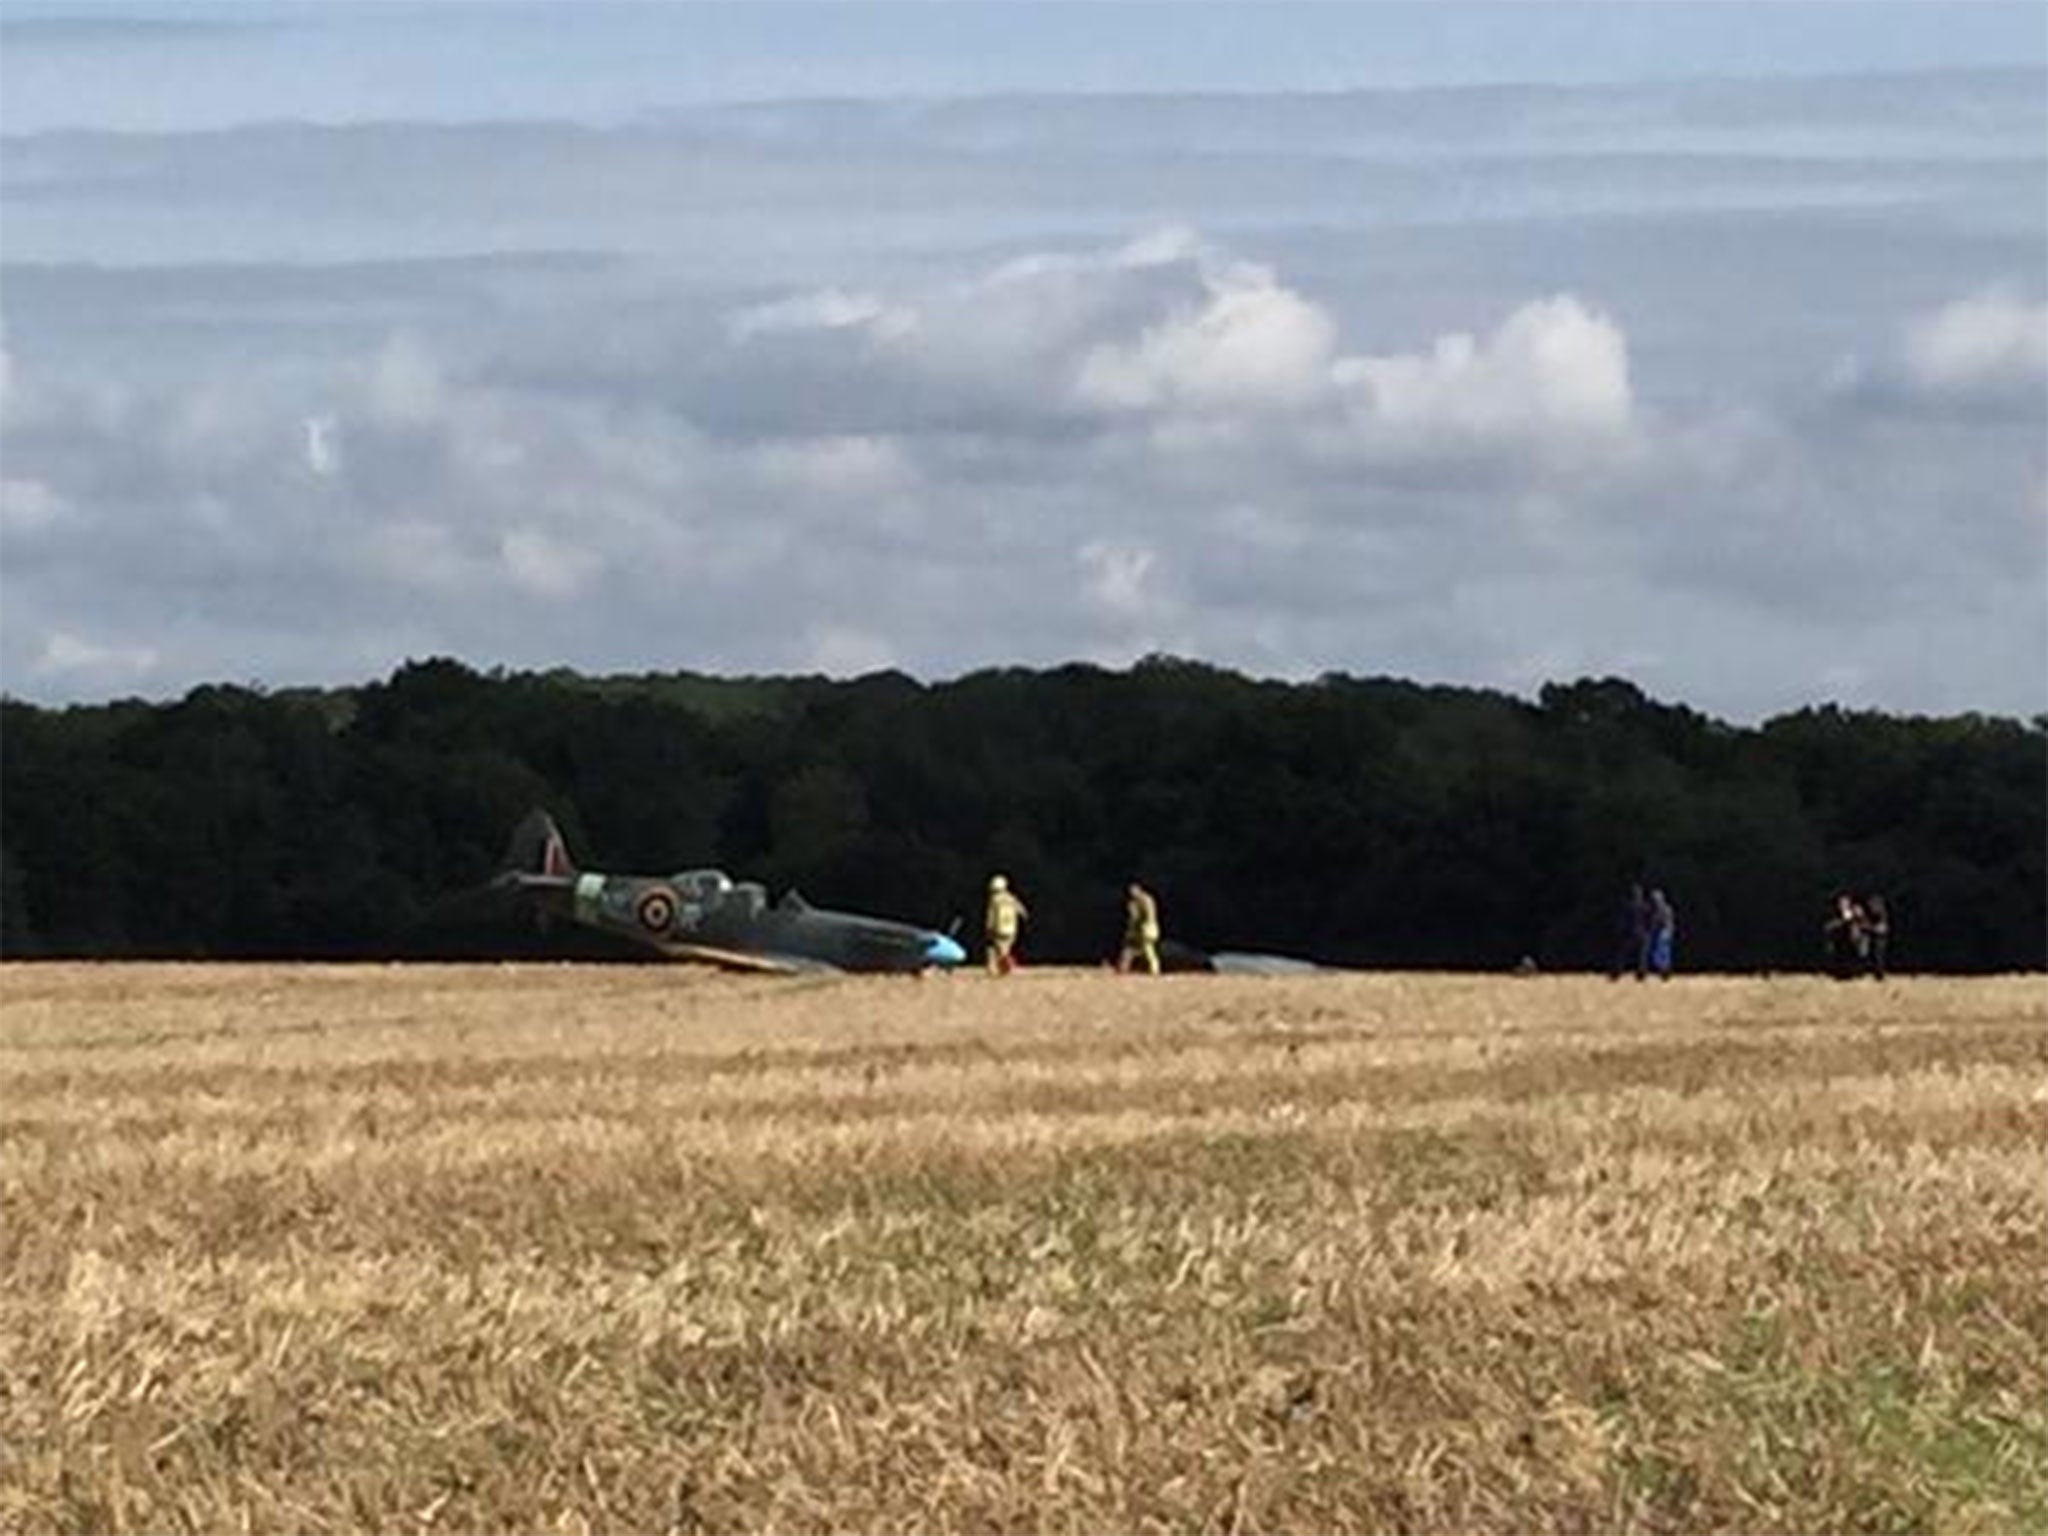 Photograph after a Spitfire crash in Ashford, Kent, taken by an eyewitness, shows emergency services arriving on the scene